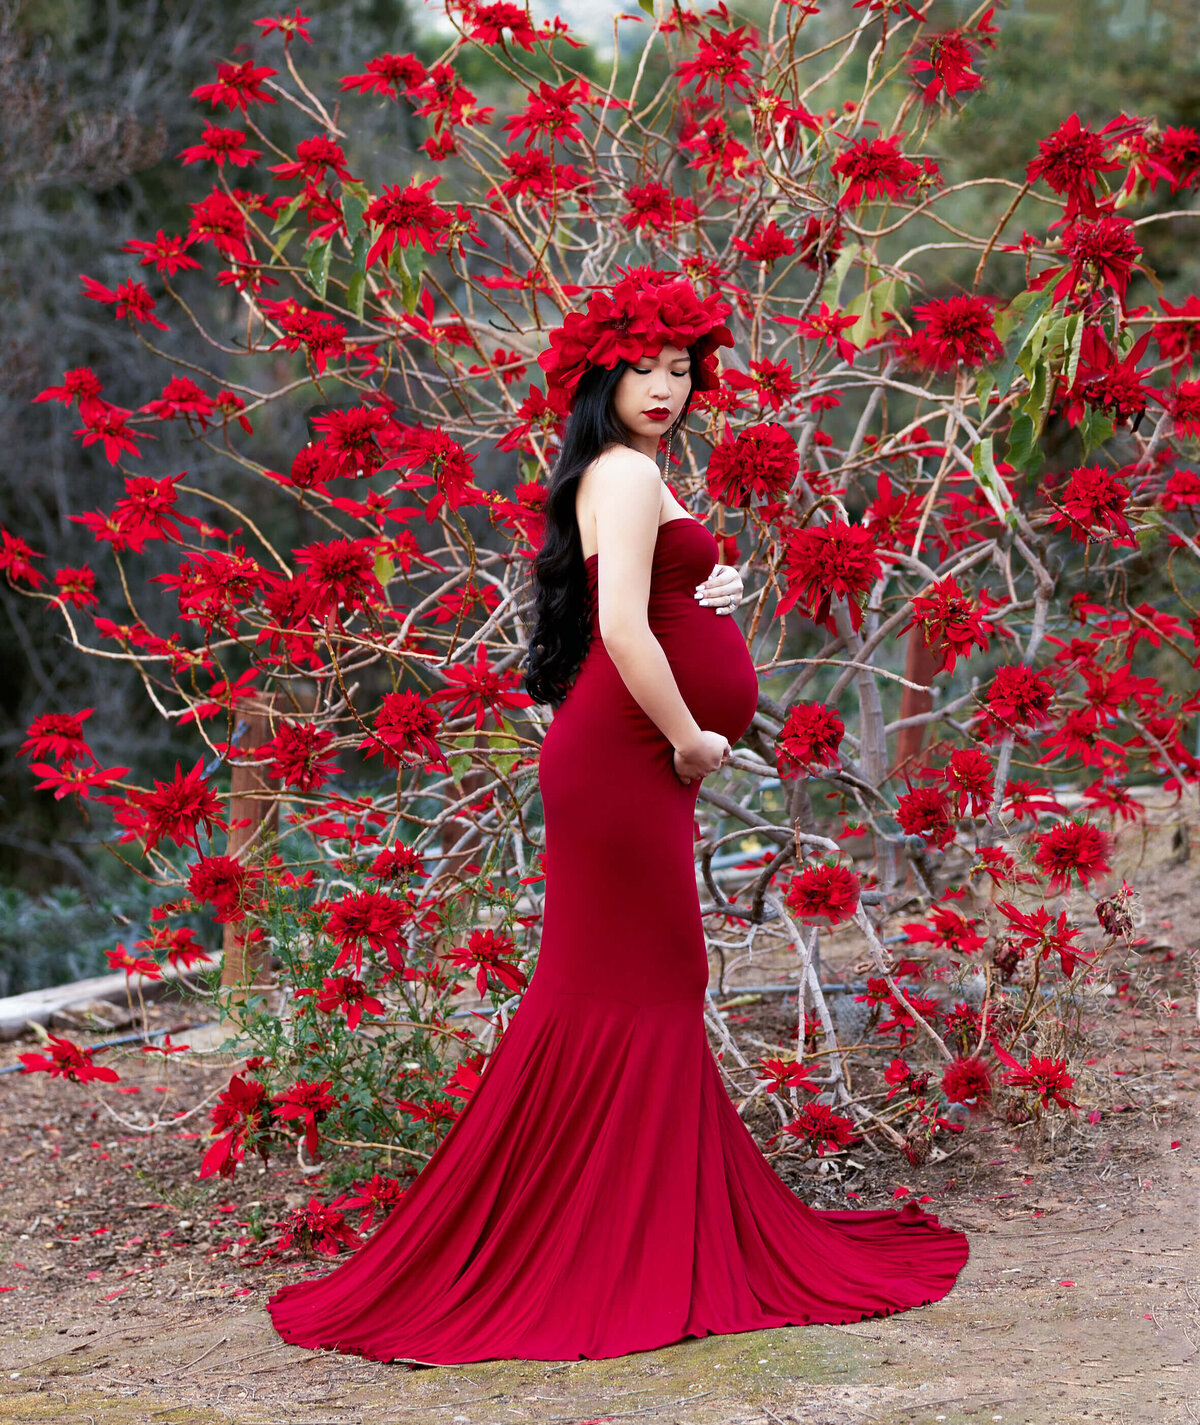 MATERNITY SESSION AT A BOTANICAL GARDEN IN FRONT ON A RED FLOWERING BUSH